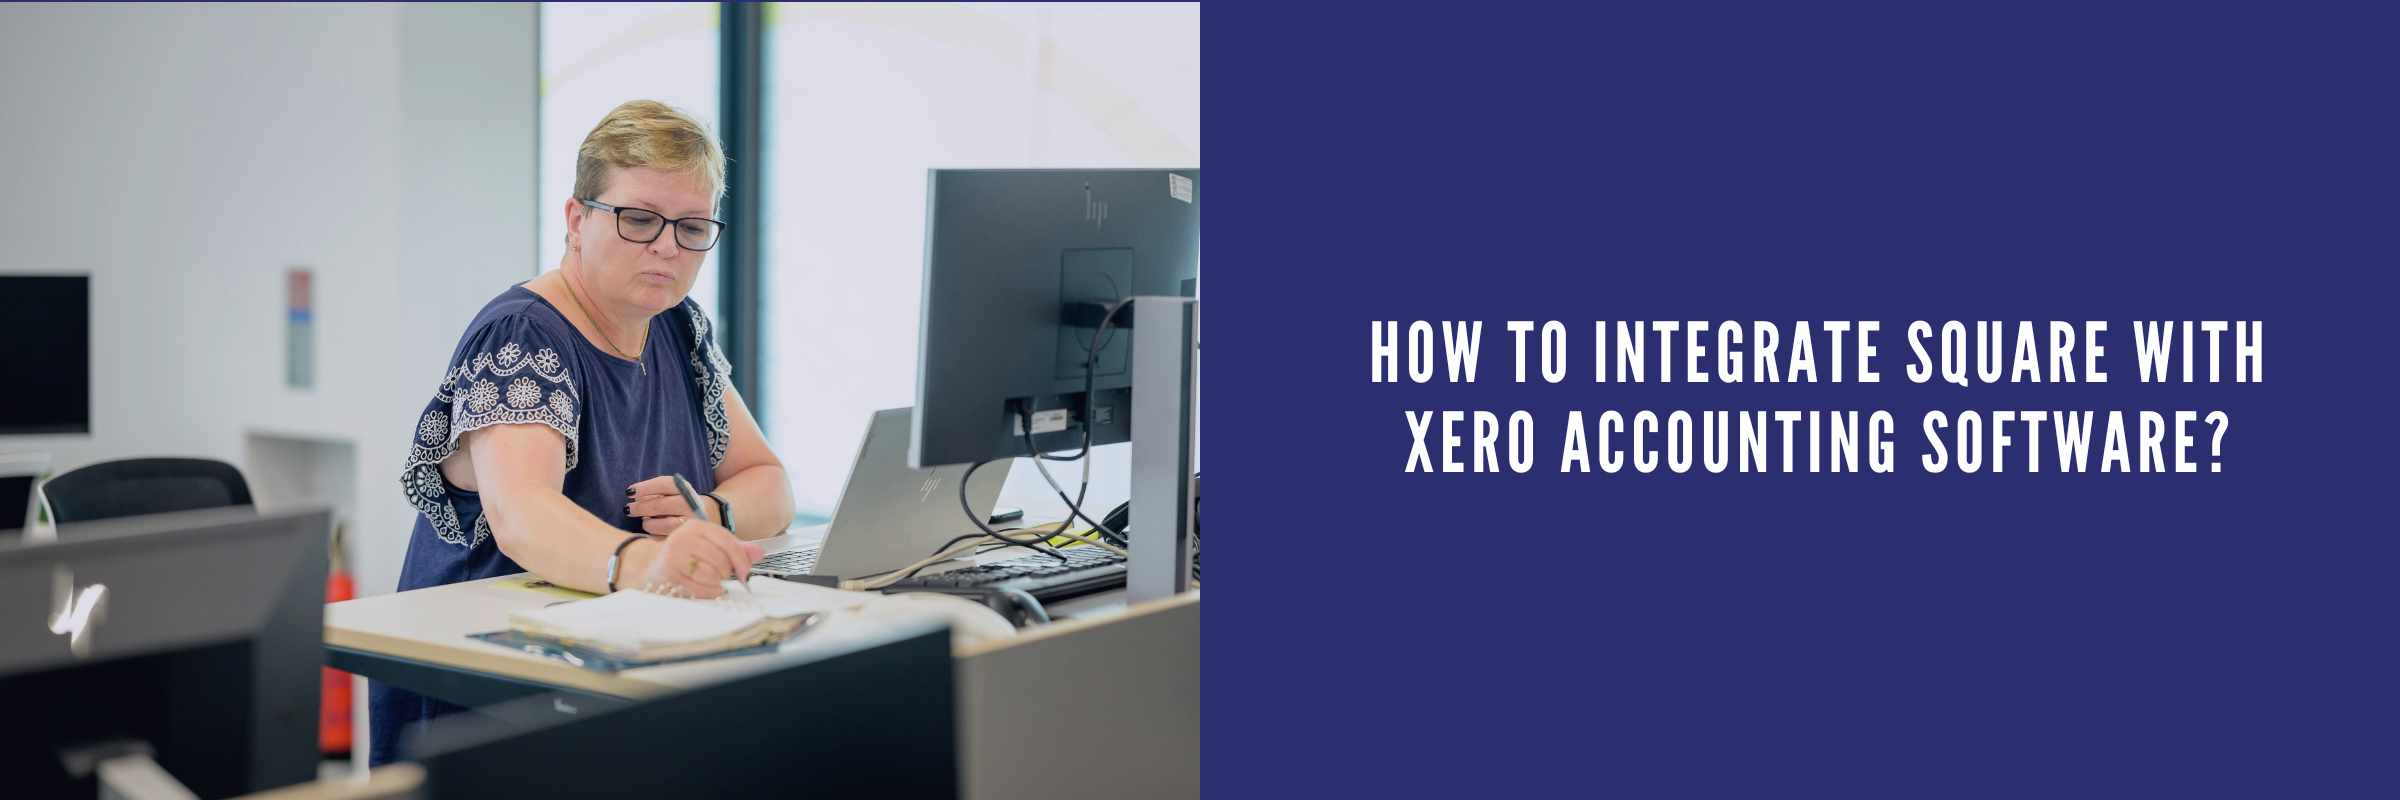 How to Integrate Square with Xero Accounting Software?